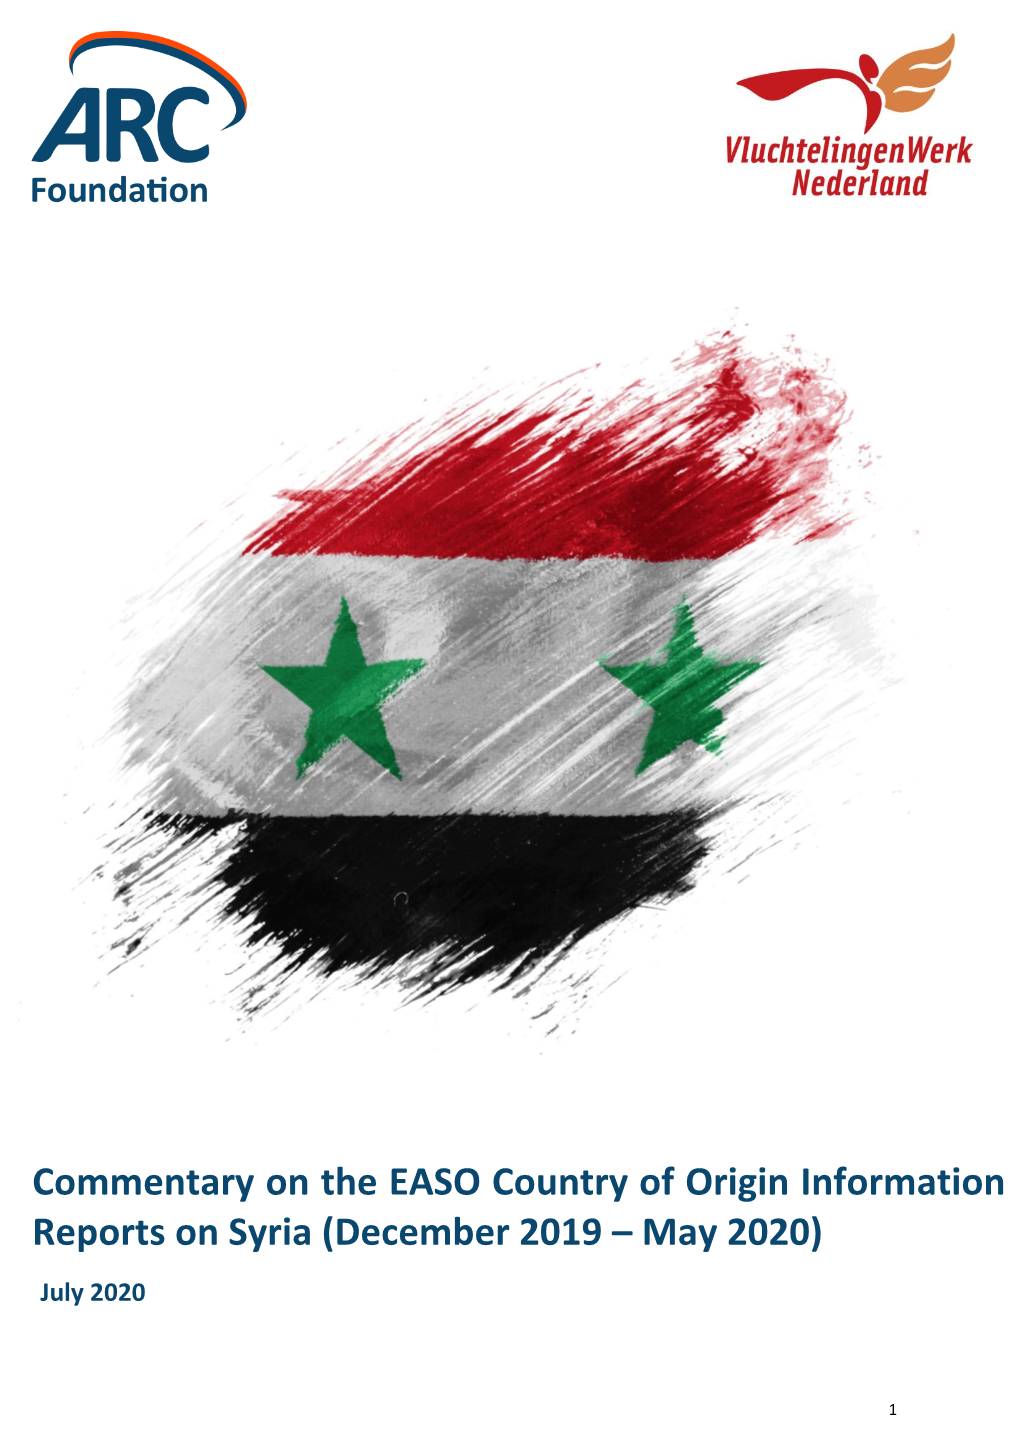 Commentary on the EASO Country of Origin Information Reports on Syria (December 2019 – May 2020) July 2020